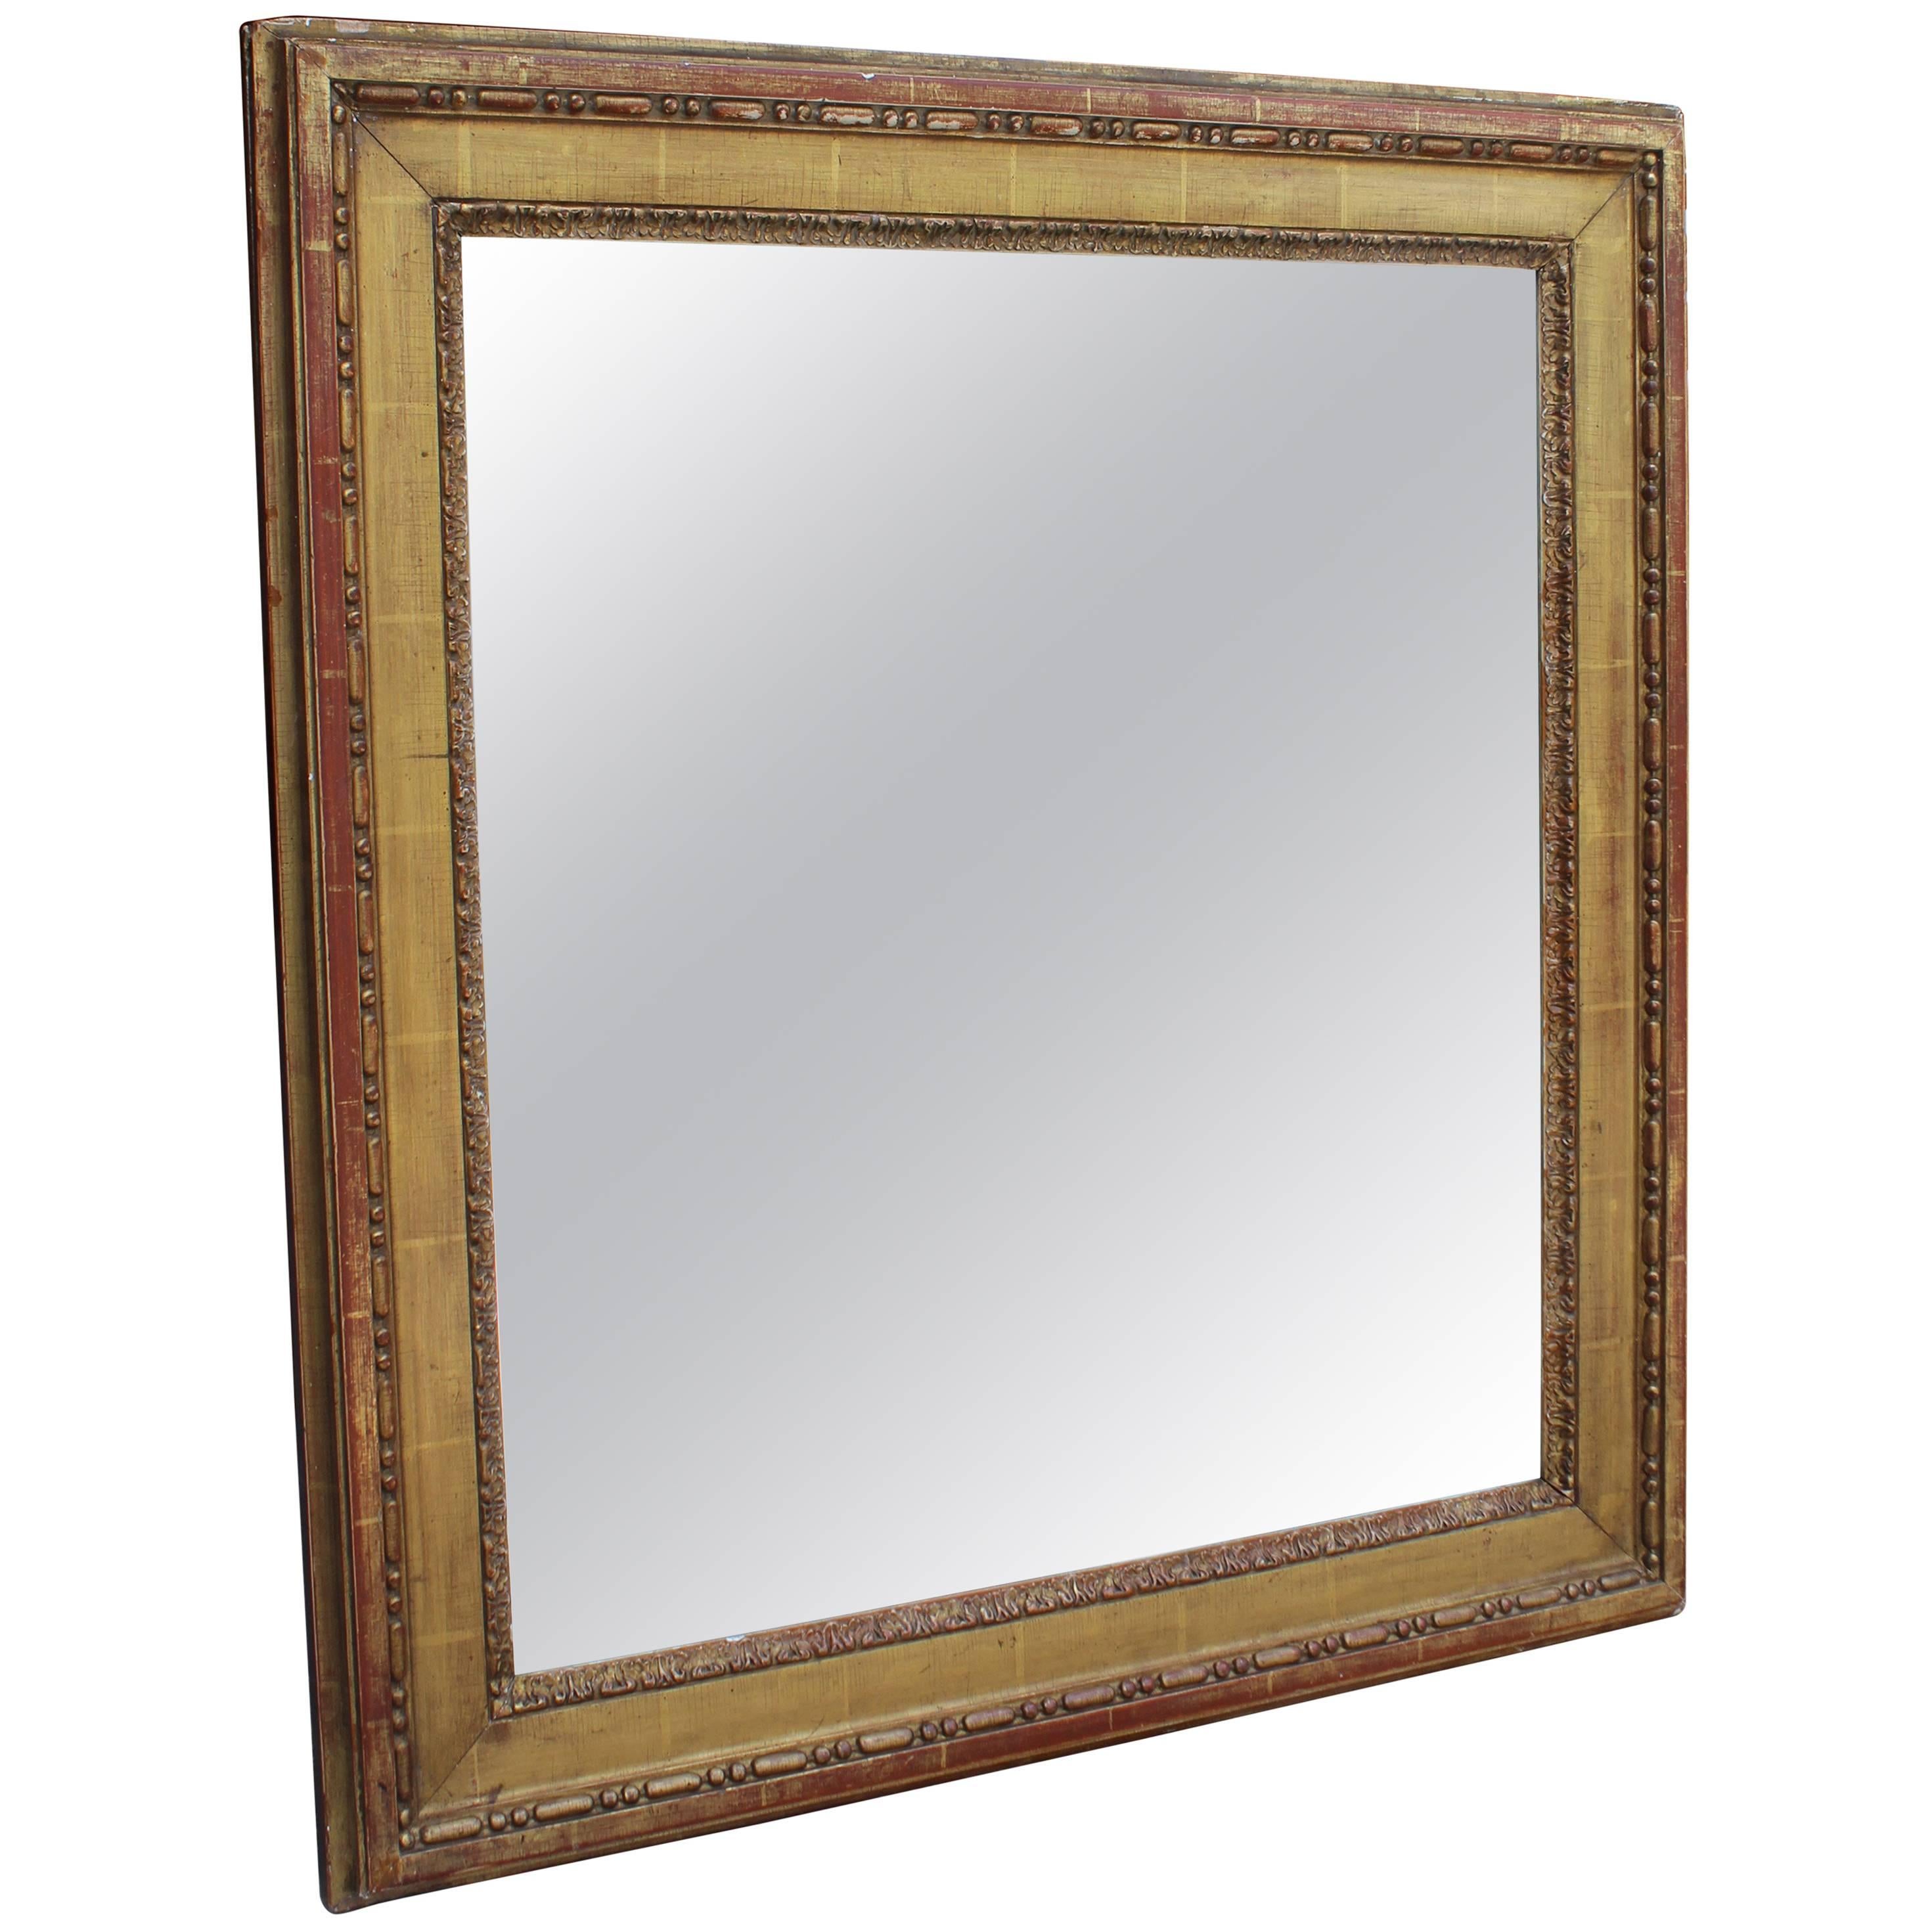 19th Century French Neoclassical Wooden Gilded Mirror